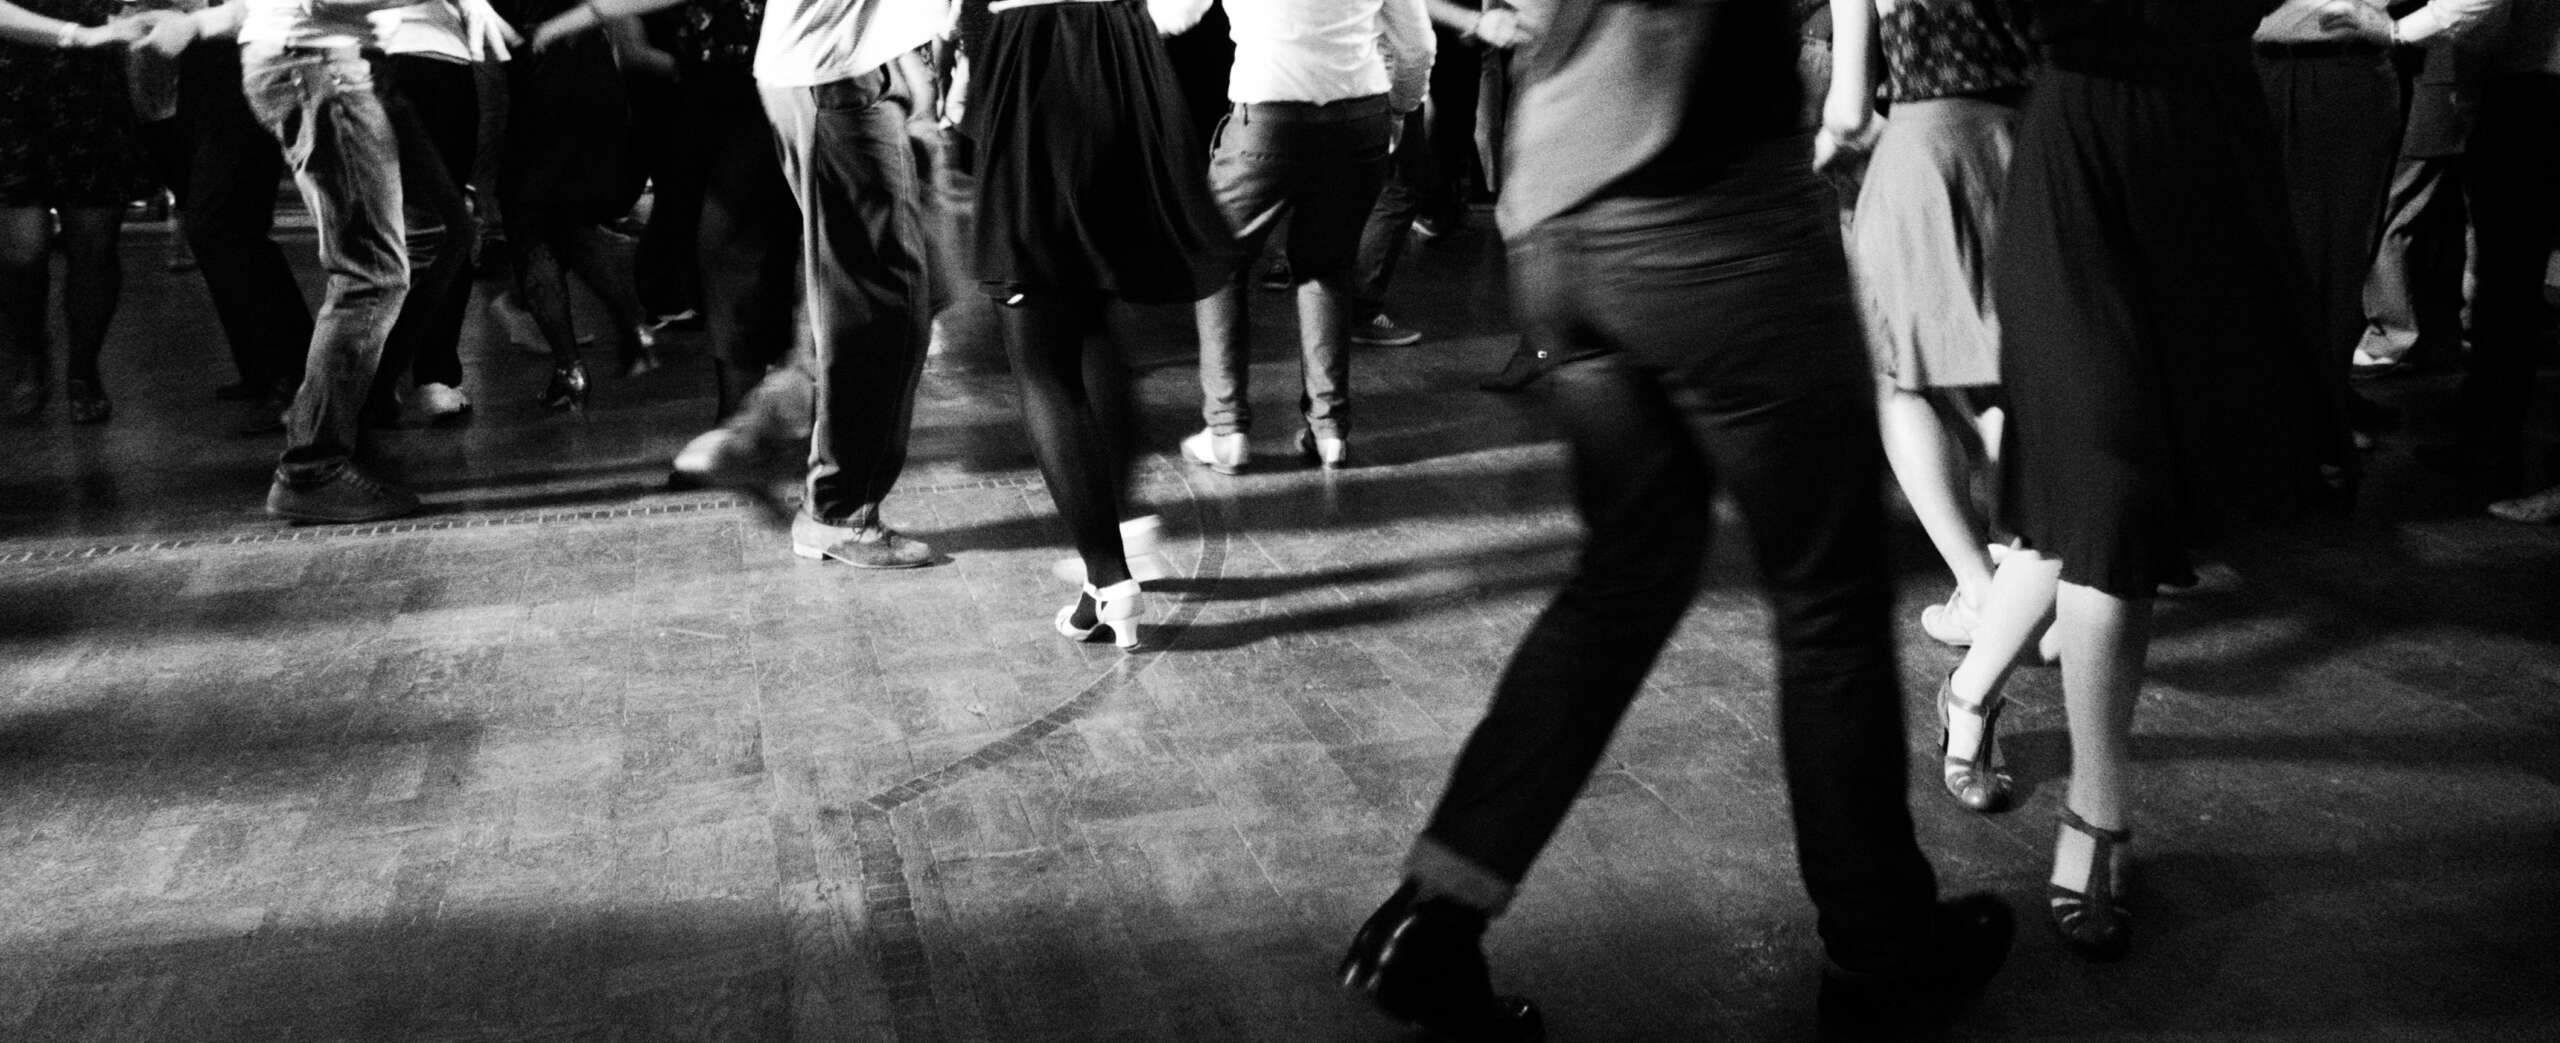 swing-dancers-in-the-ballroom-vintage-style_t20_6lrjQv